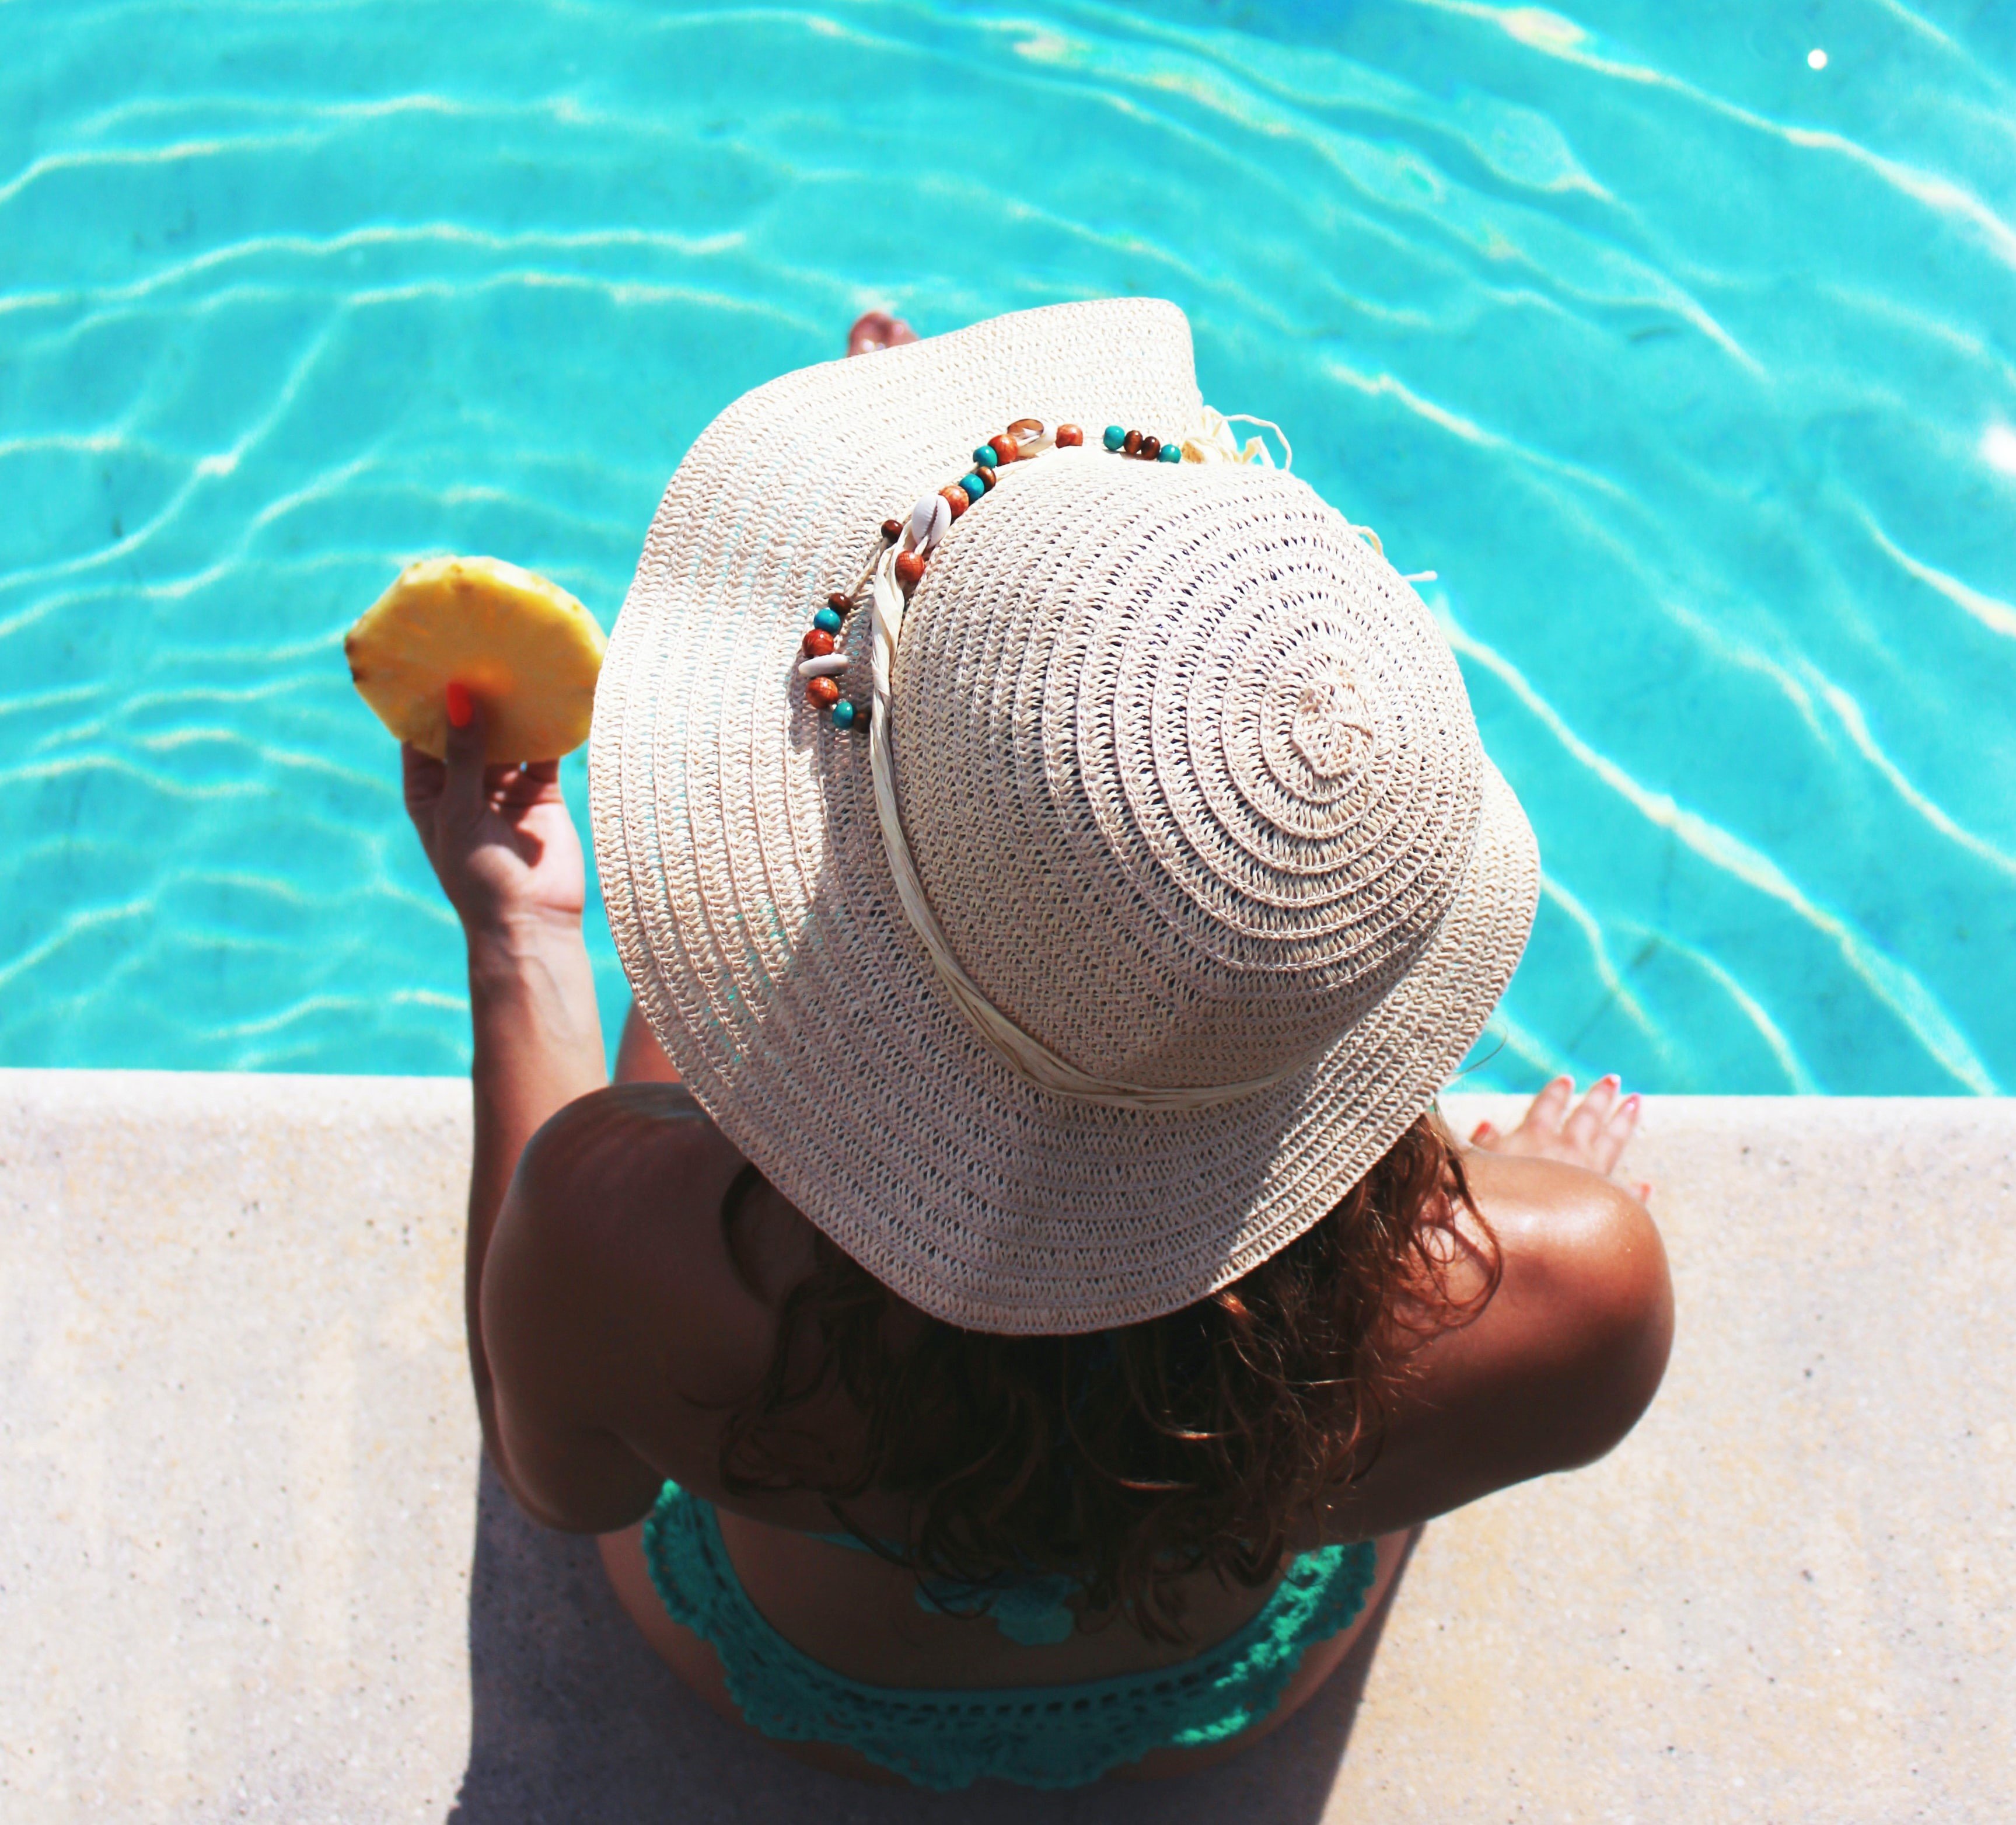 The girls at the pool weren't paying Jonathan any attention. | Source: Unsplash